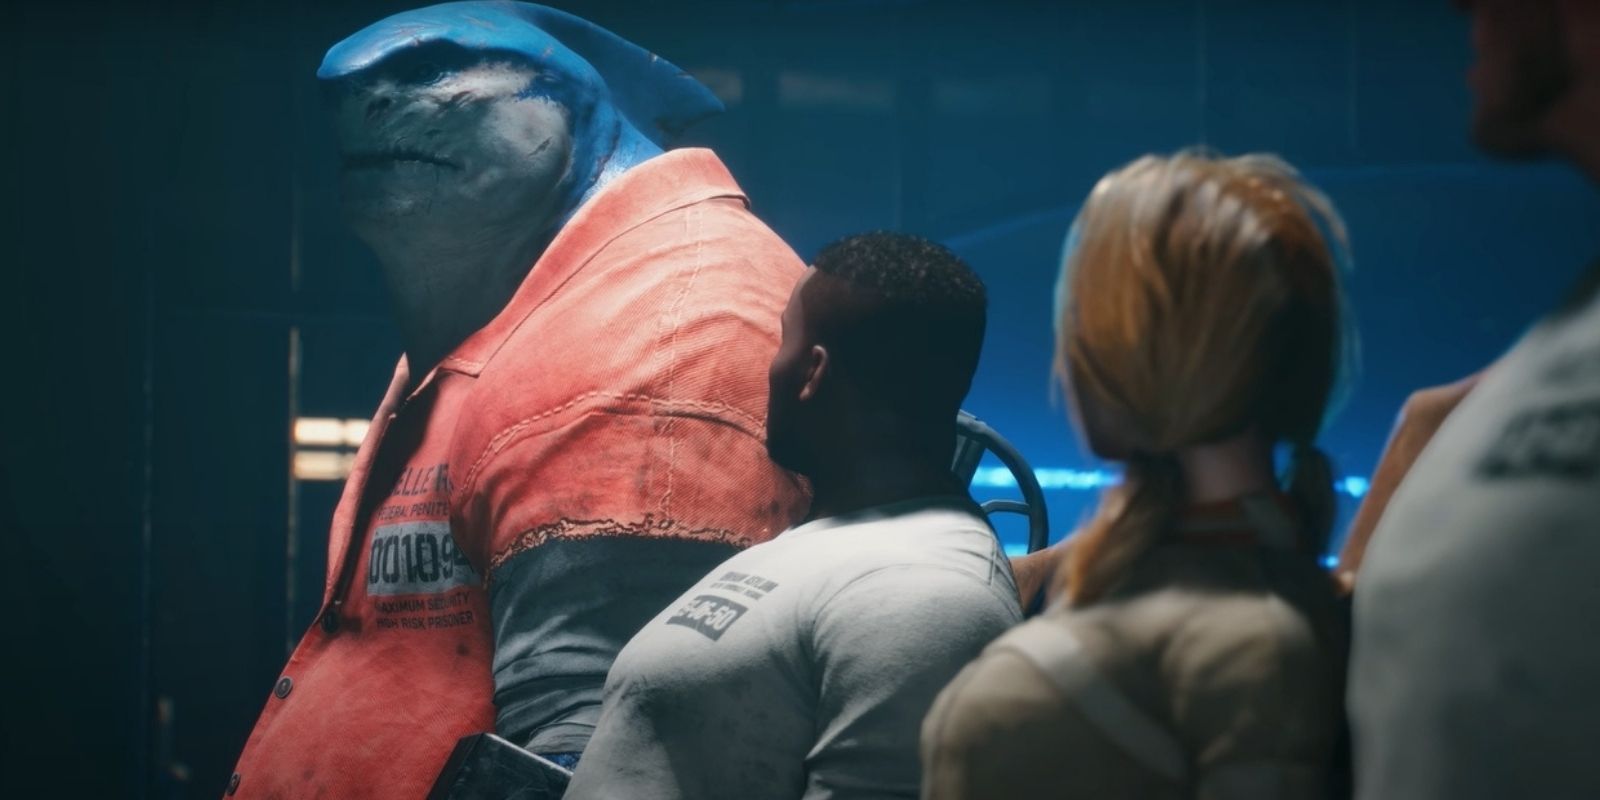 King Shark, Deadshot, Harley Quinn and Captain Boomerang strapped to vertical beds in Suicide Squad: Kill the Justice League